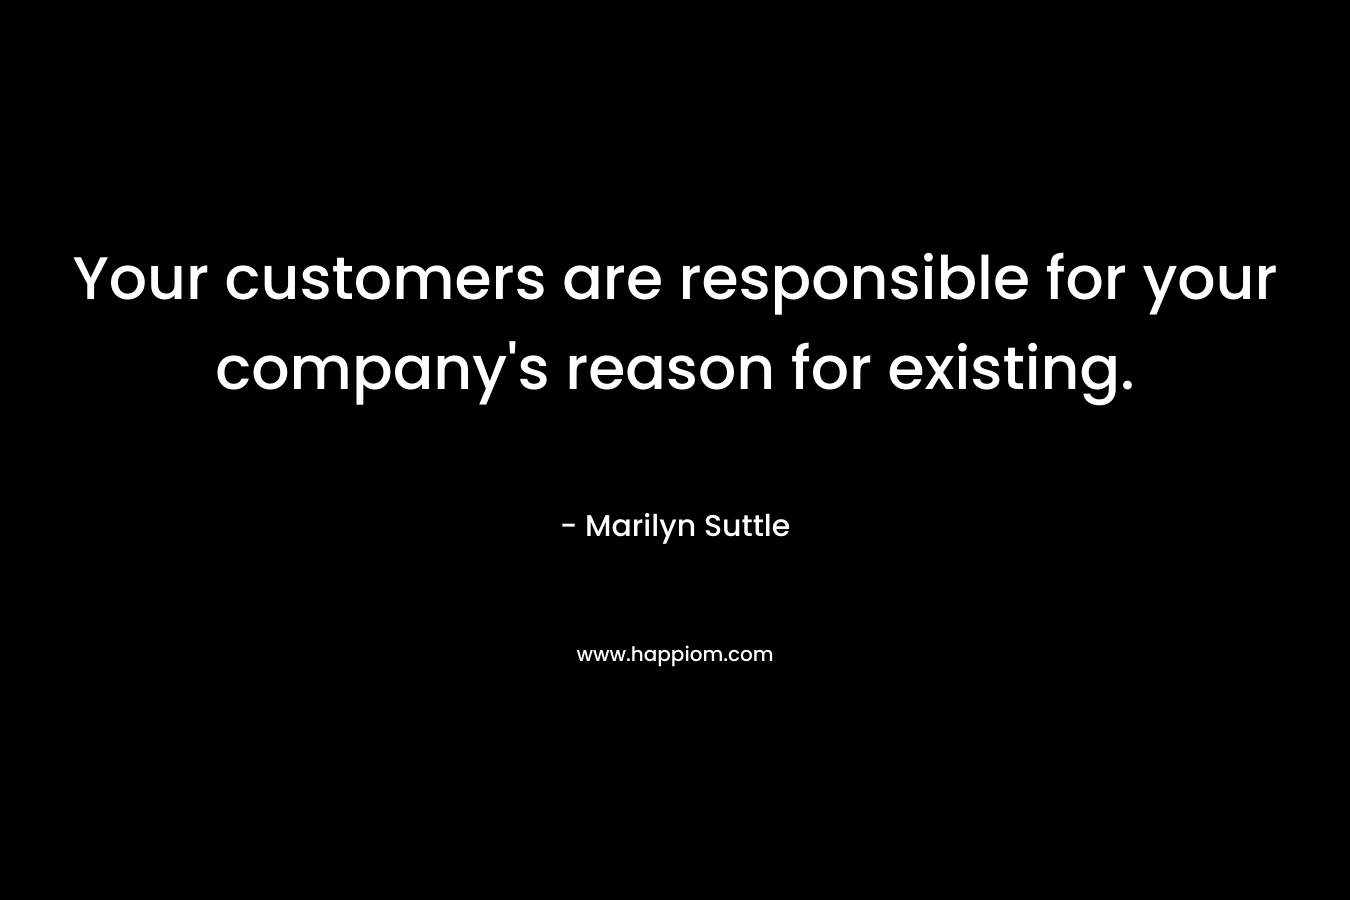 Your customers are responsible for your company’s reason for existing. – Marilyn Suttle